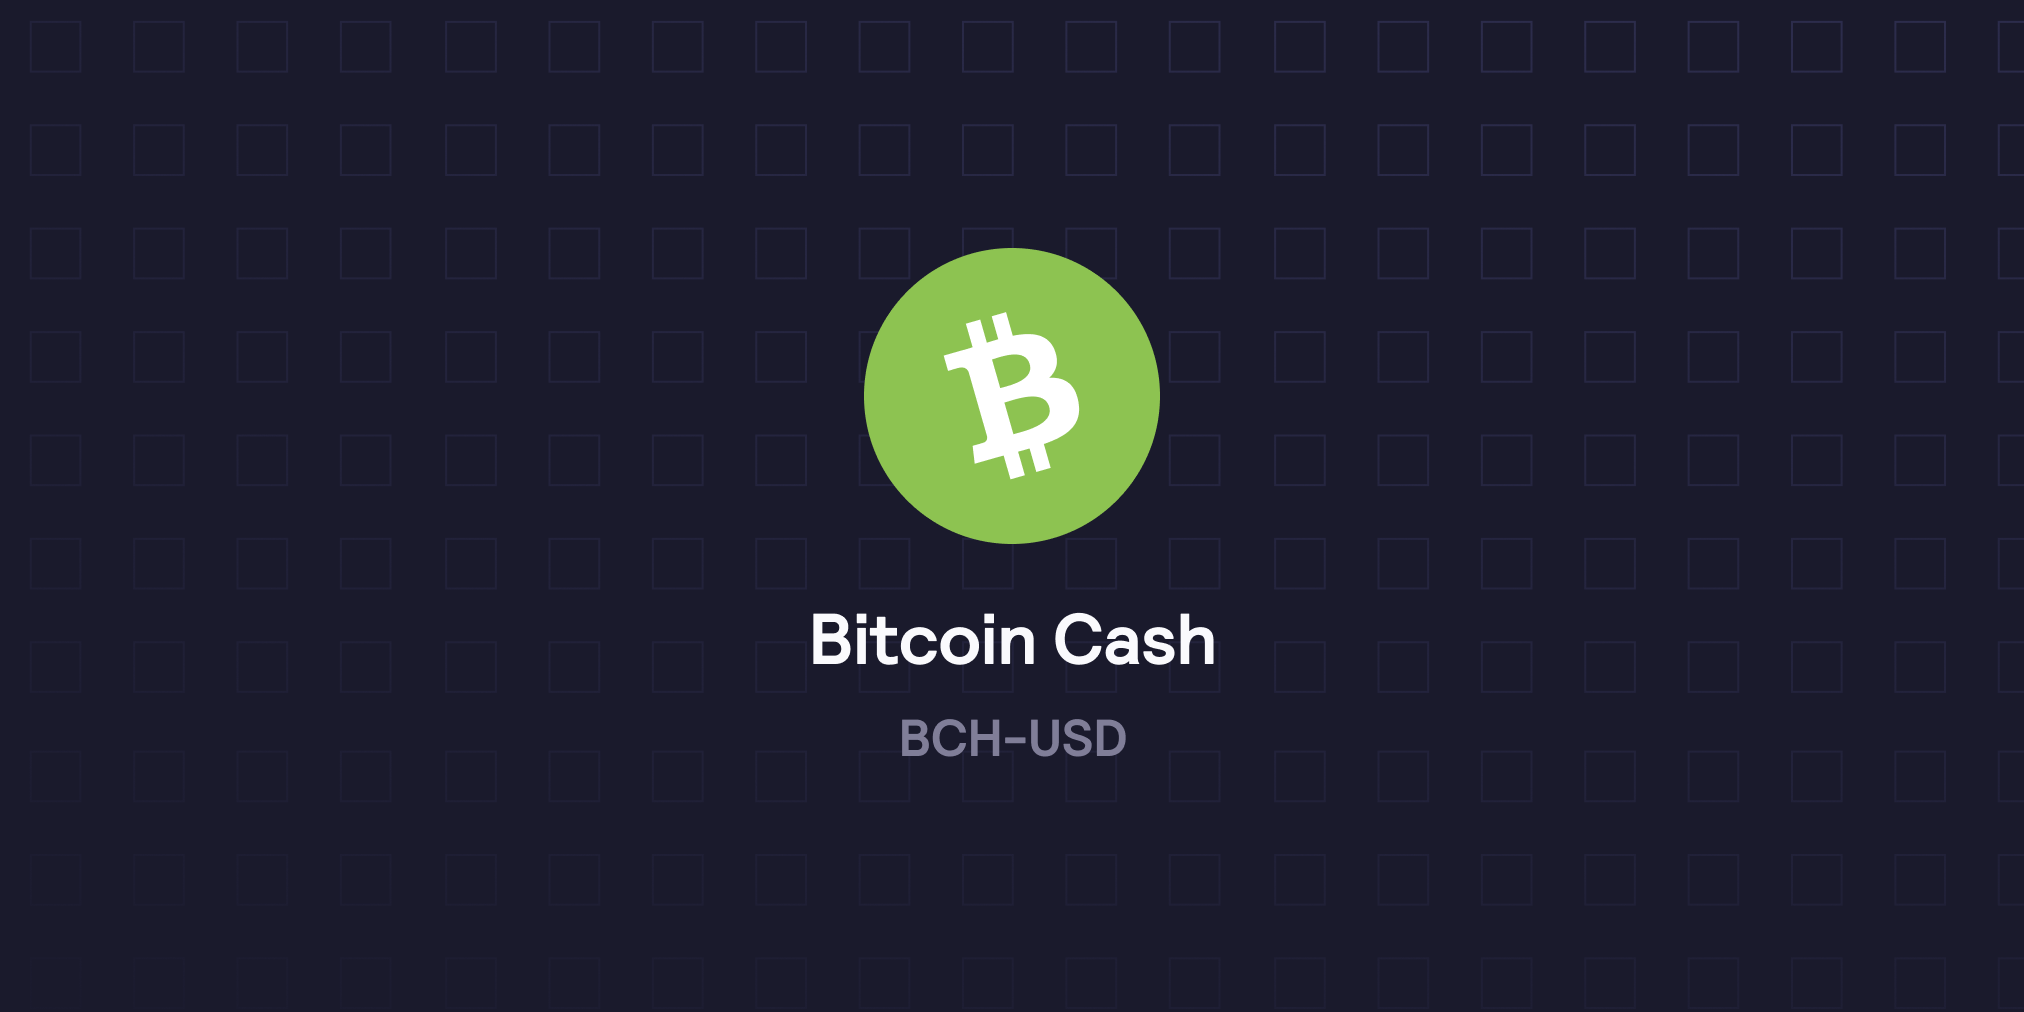 BCH now live